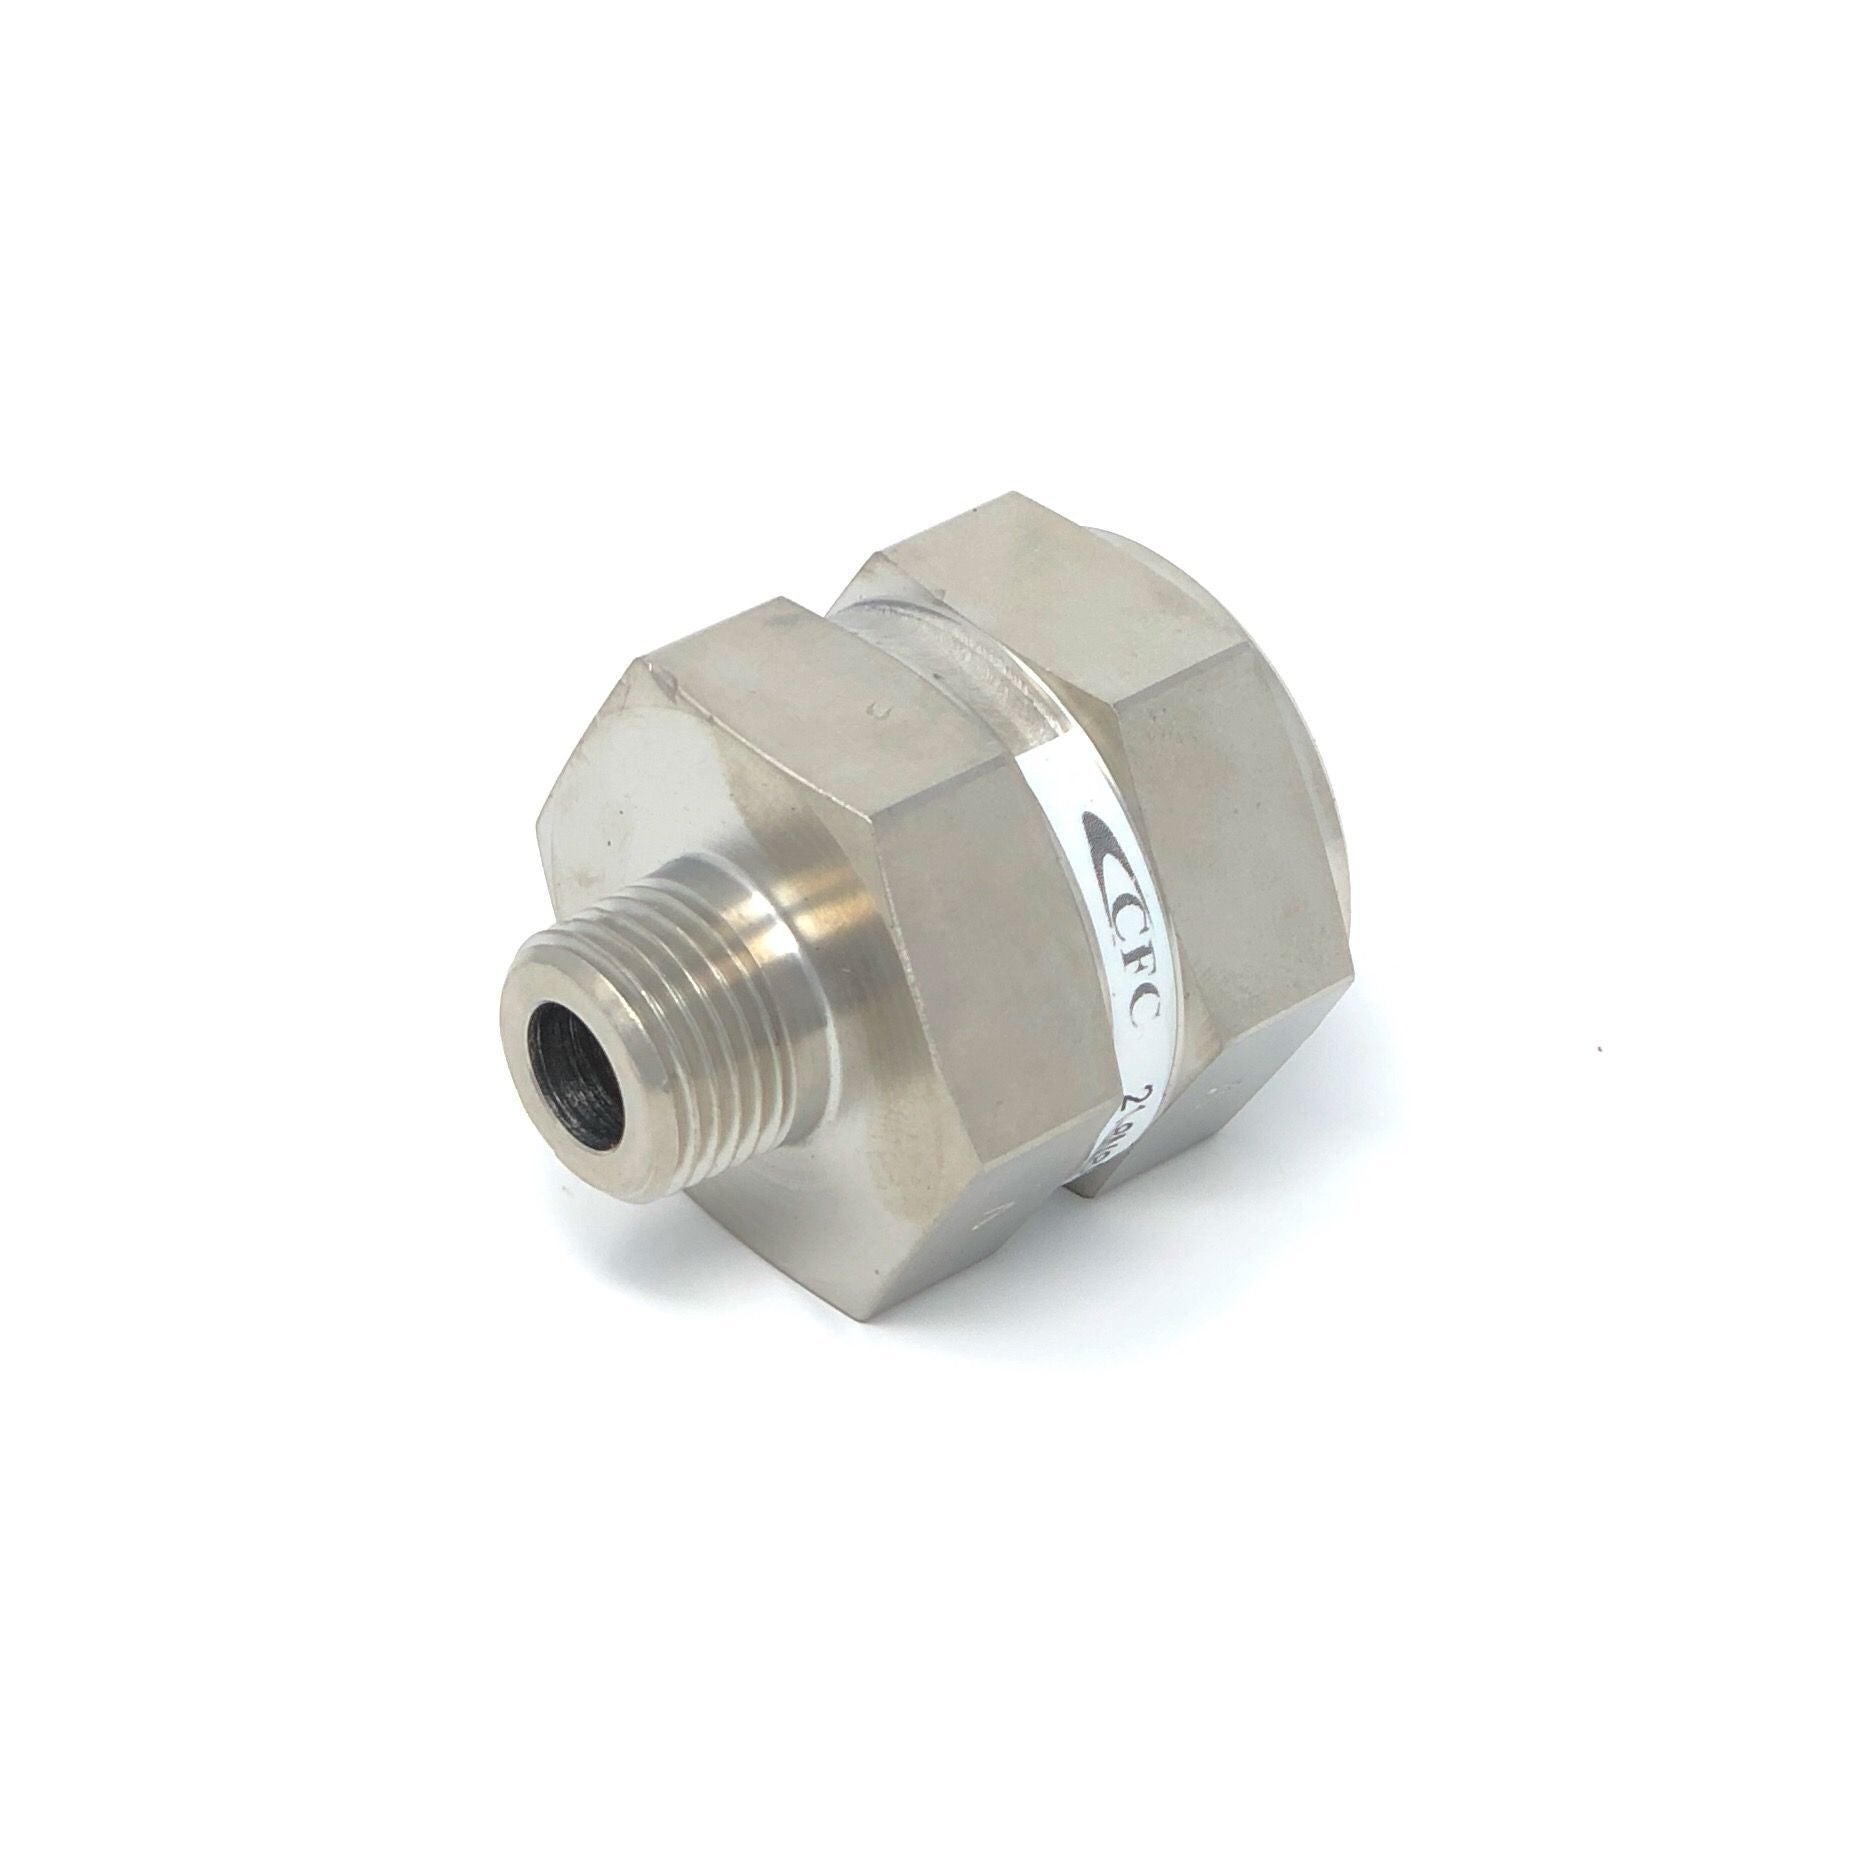 21-4M4M-40S : Chase High Pressure Inline Filter, 6000psi, #4 SAE (1/4"), 40 Micron, No Visual Indicator, No Bypass